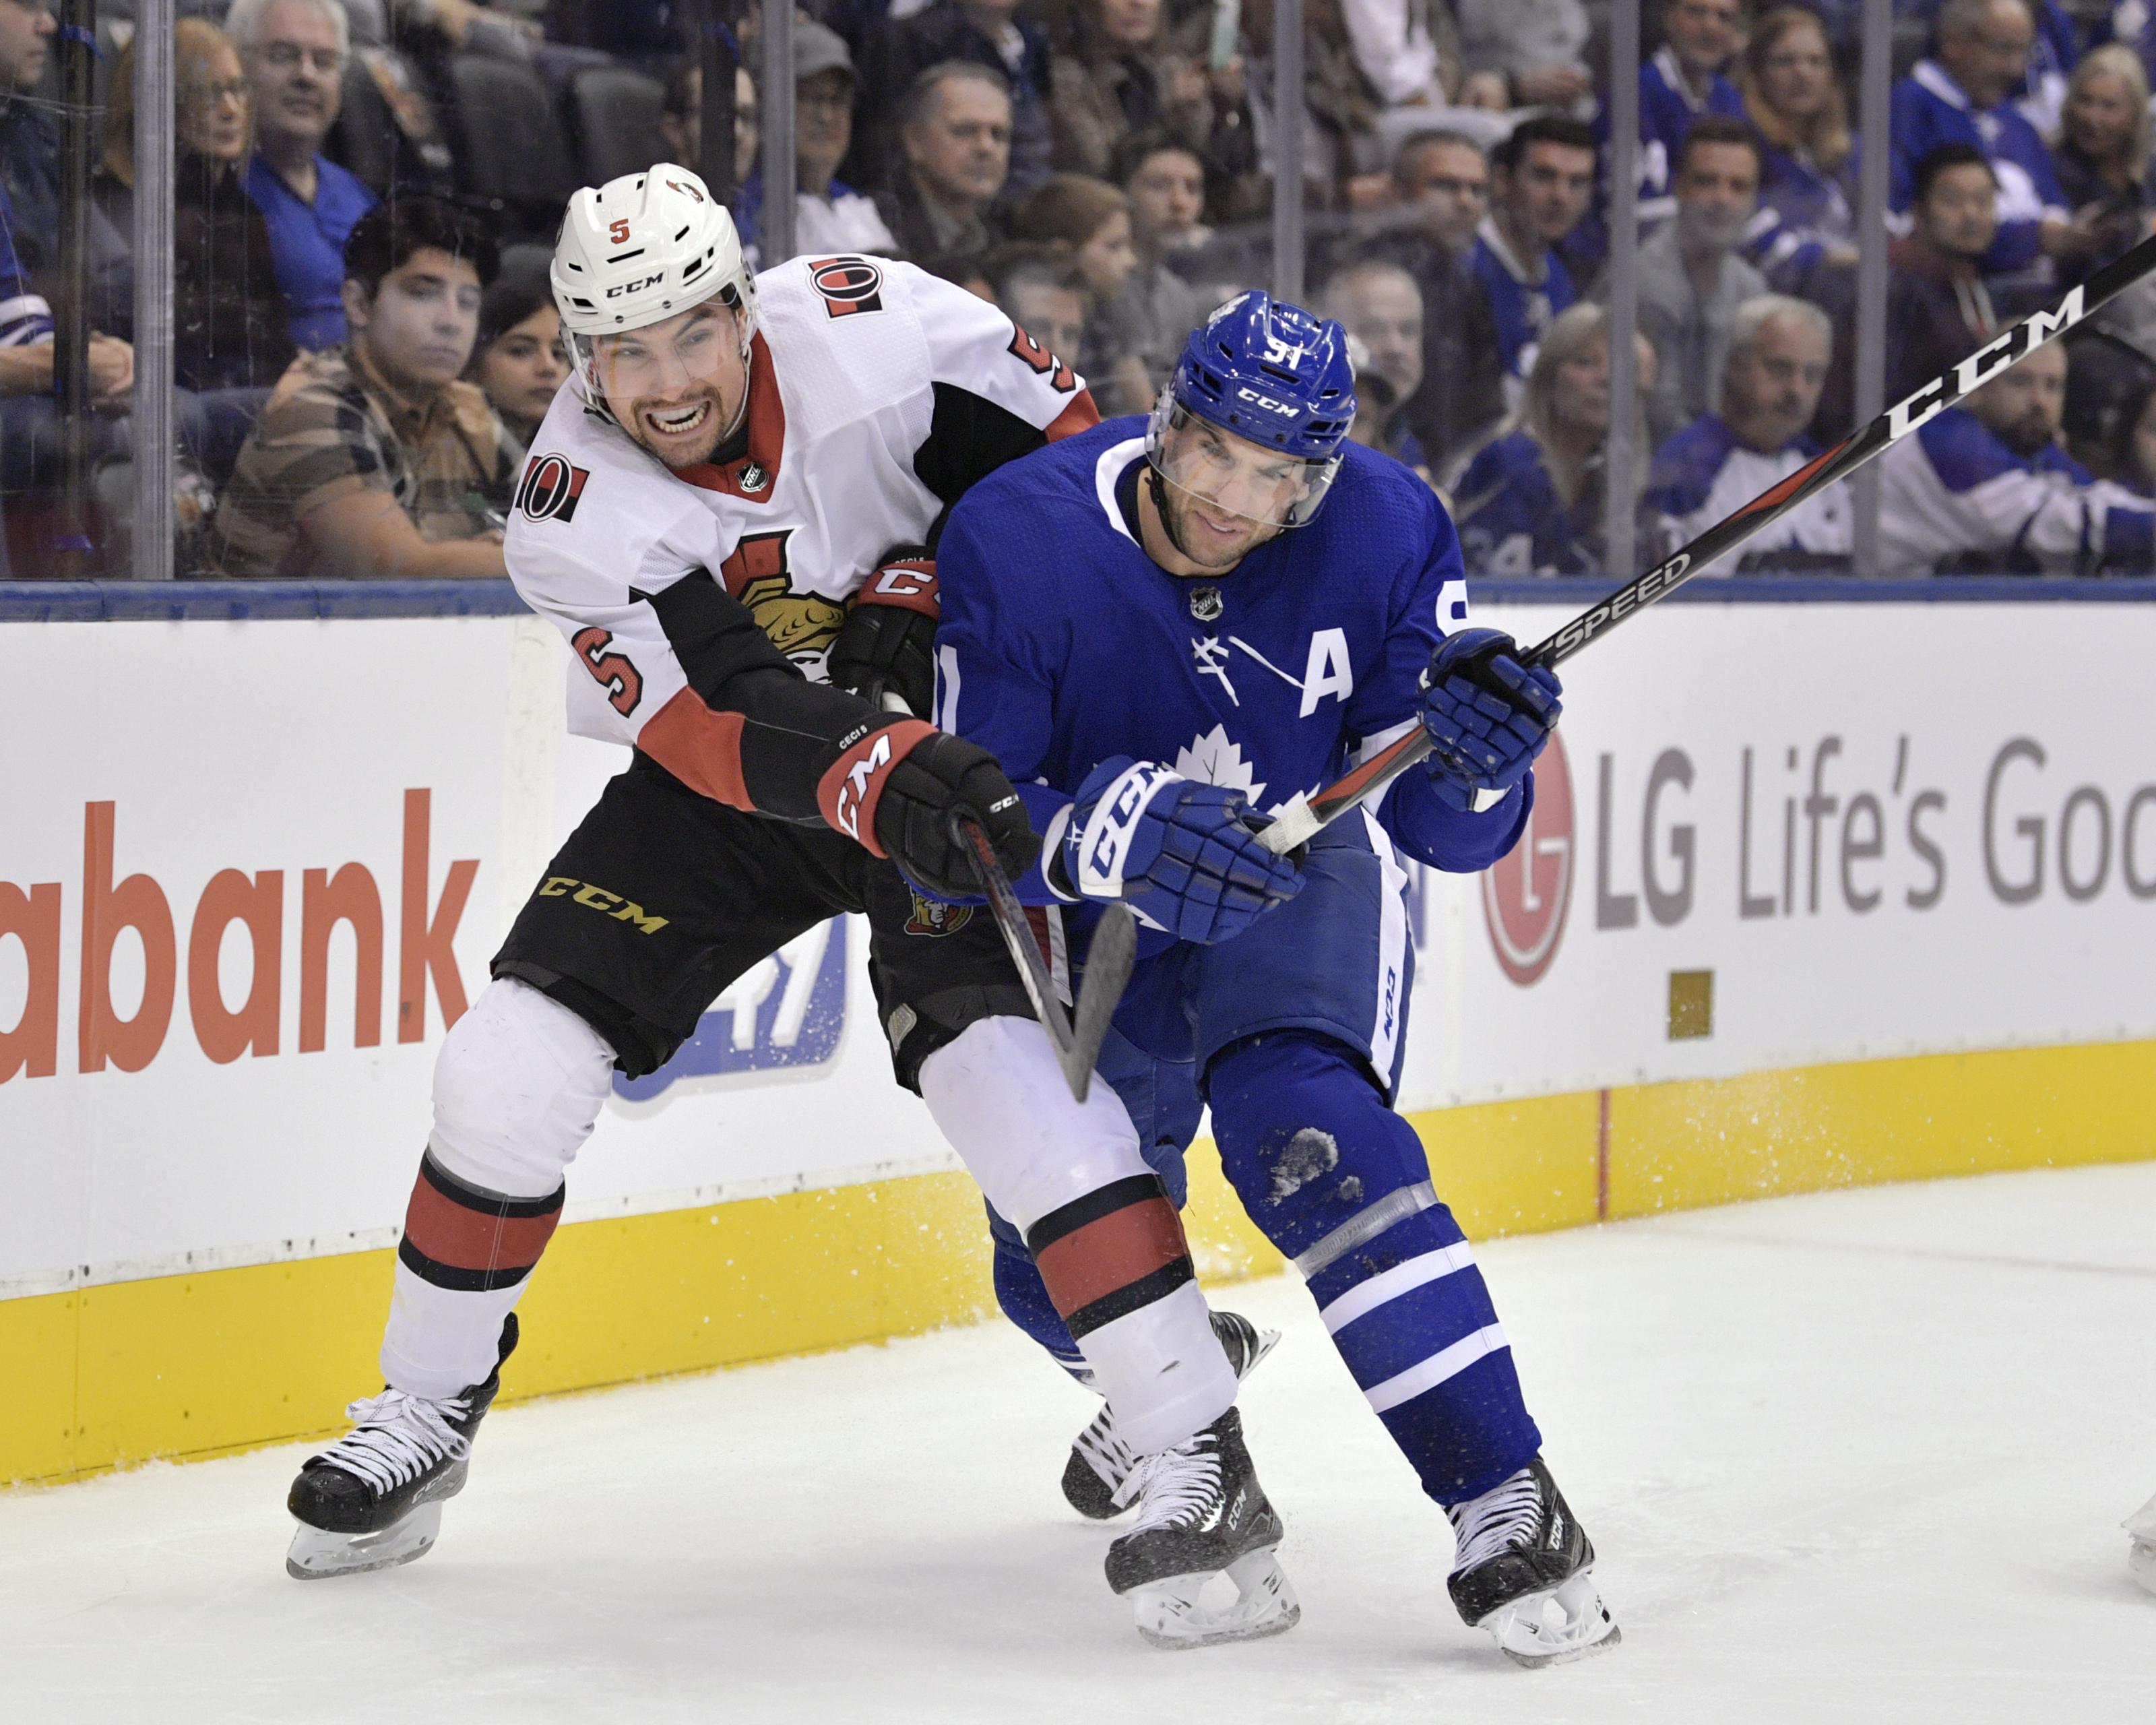 Analyzing Cody Ceci's game: What will he do for the Maple Leafs?